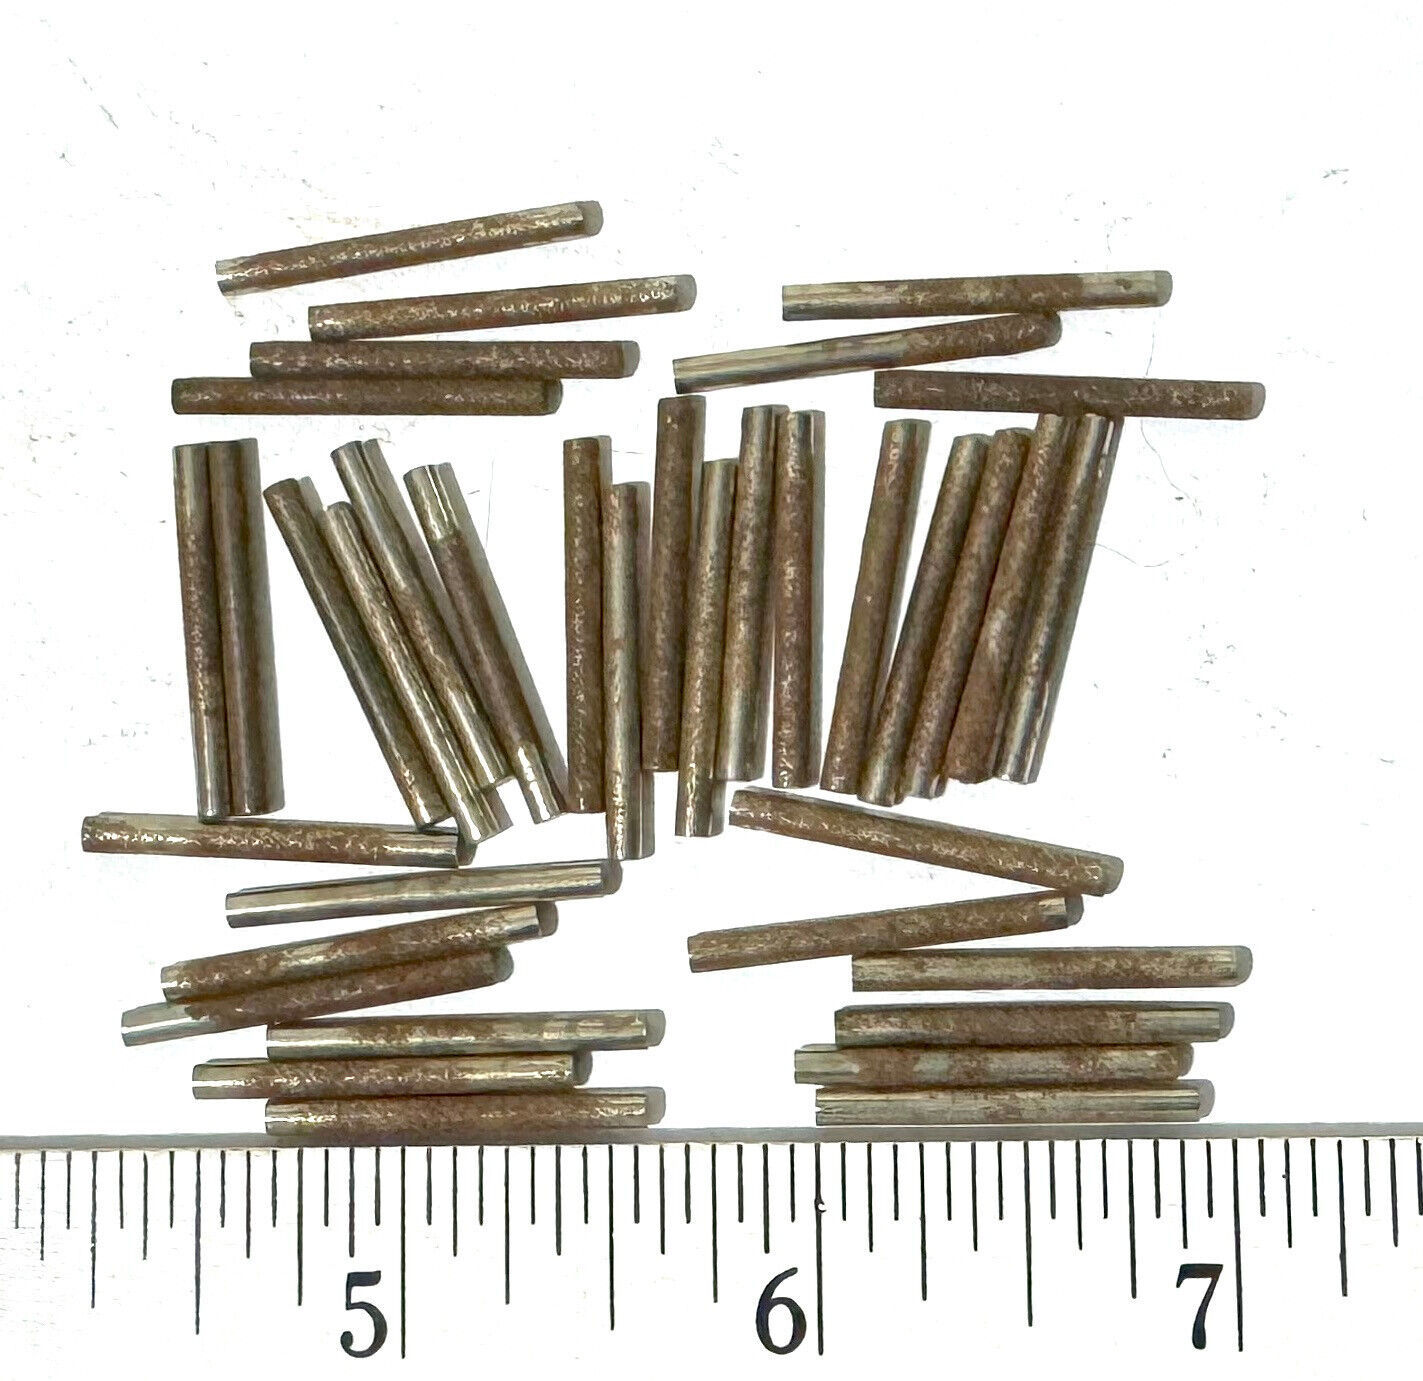 36pc 1960s Aurora Model Motoring Slot Car Track Rusty Joiners Used but Usable - $4.99